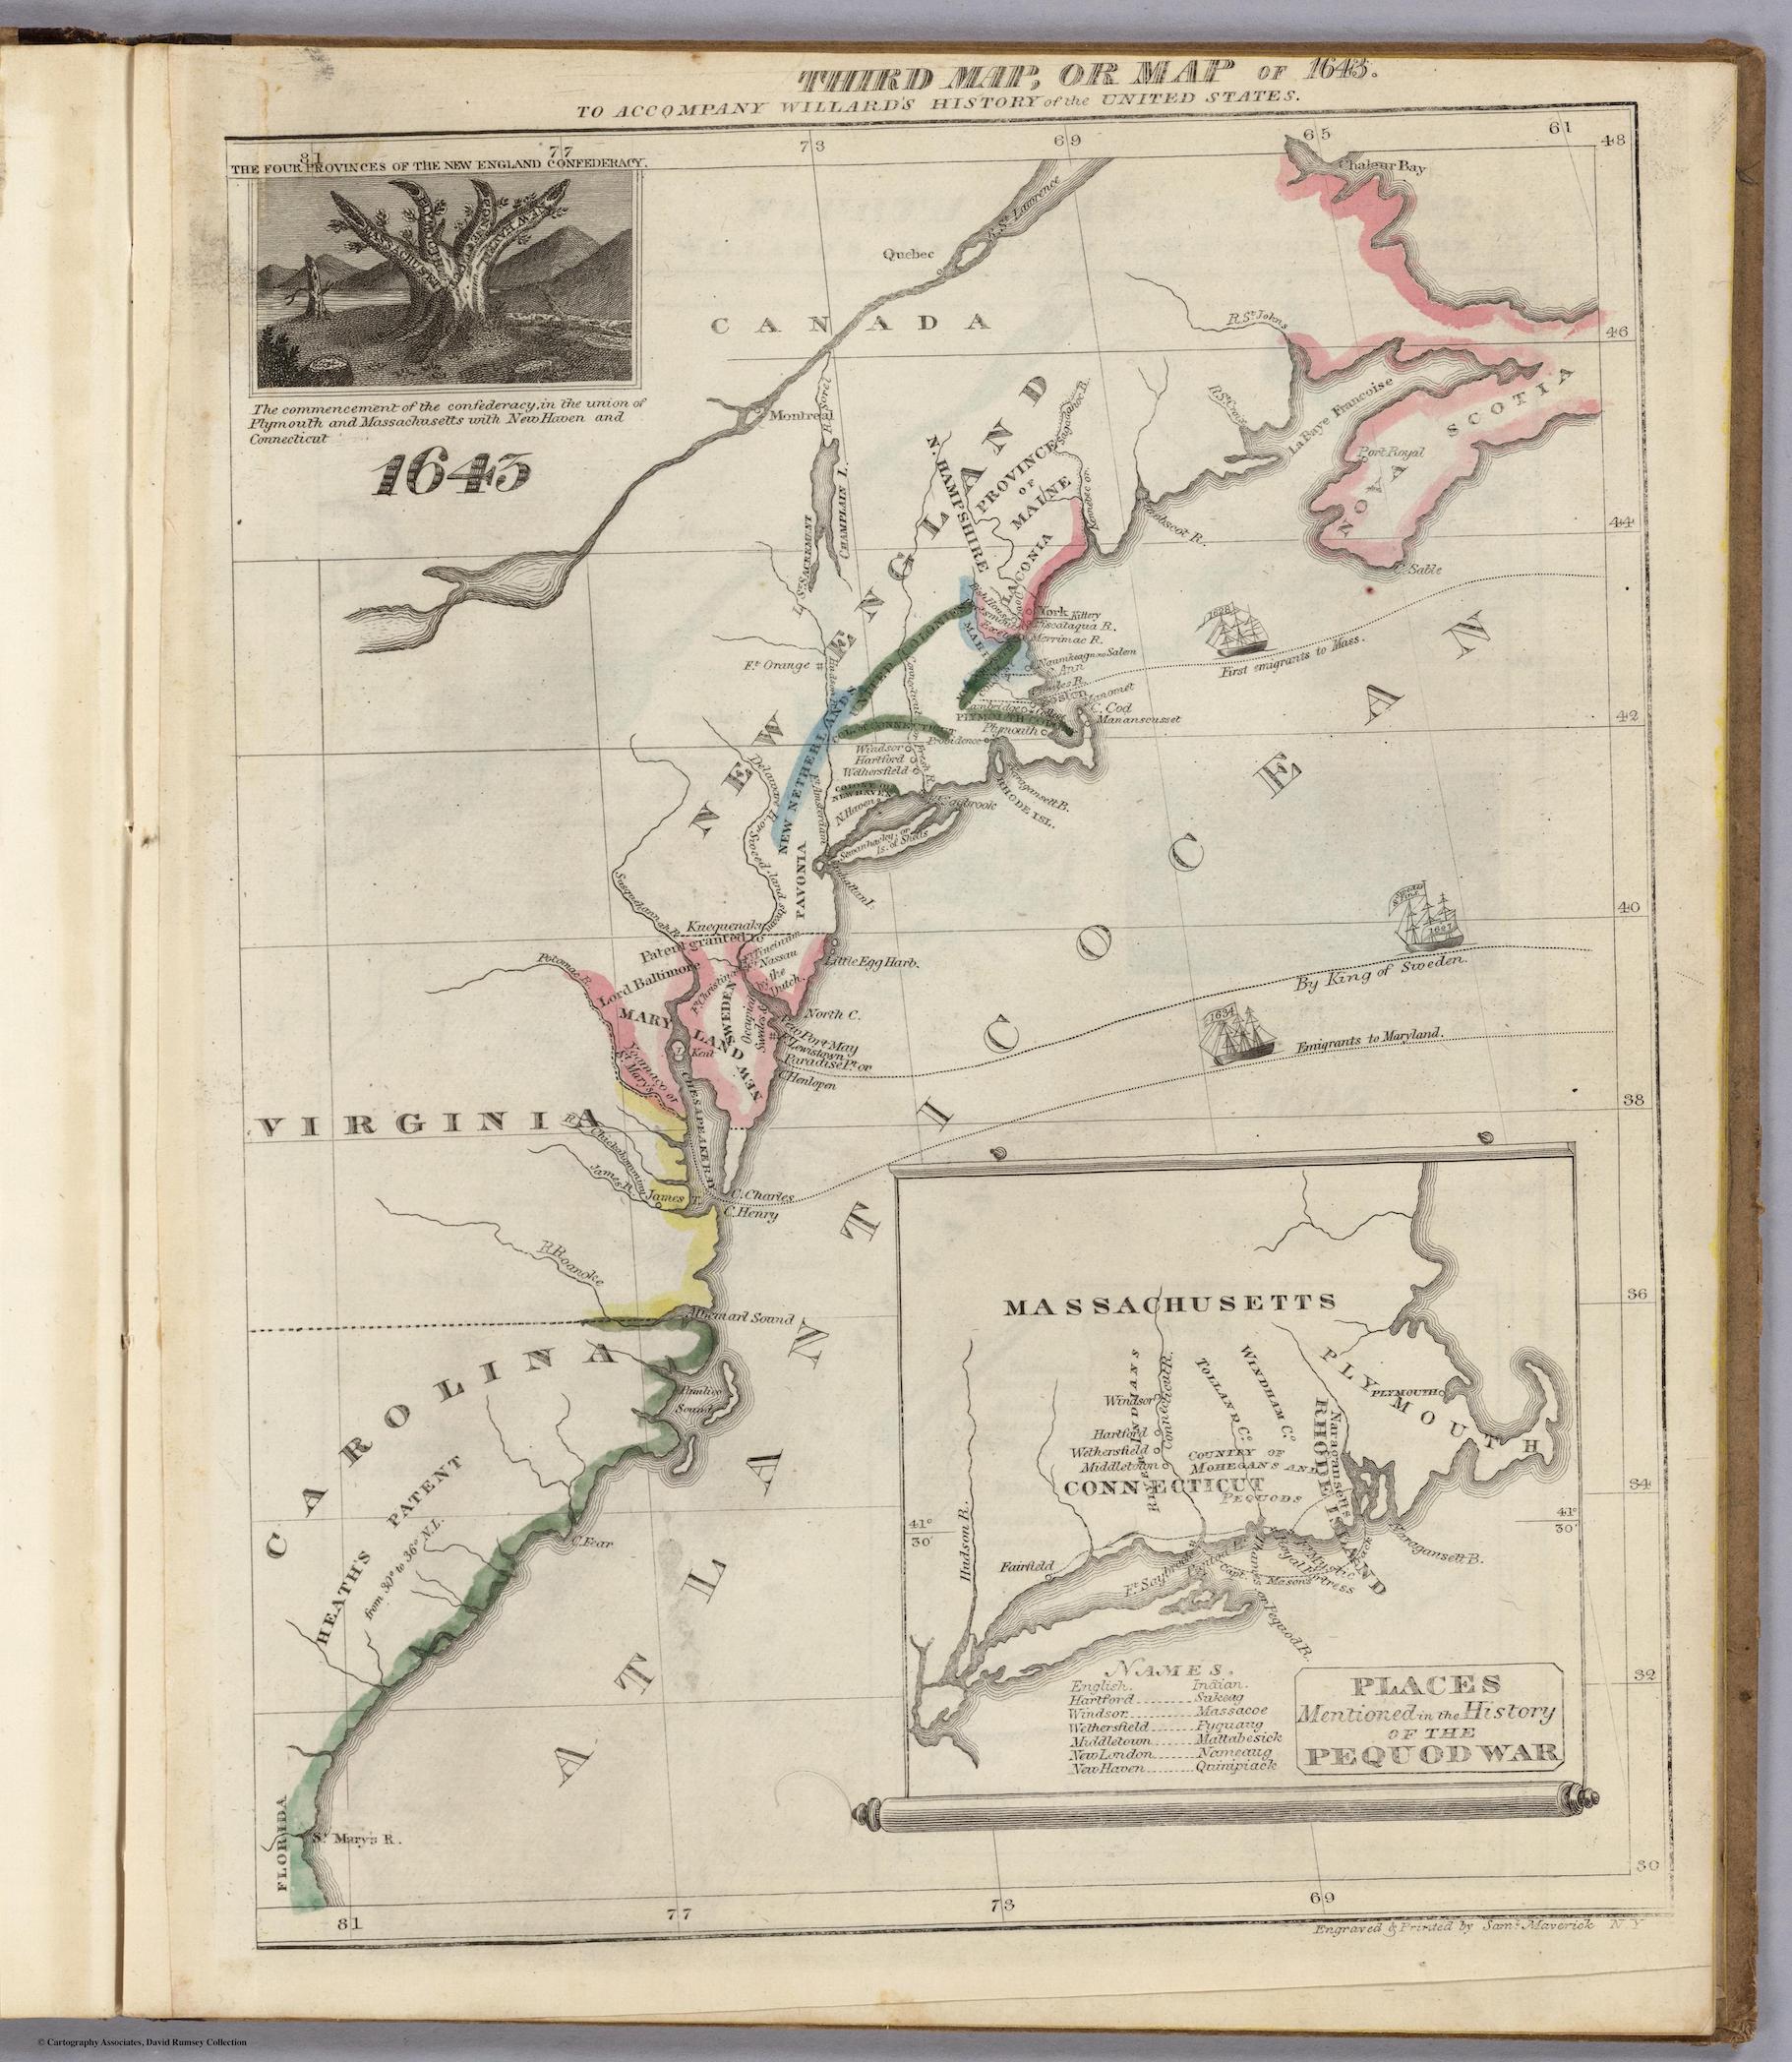 A map depicting the east coast of North America in 1643 from Nova Scotia to the top of Florida, with particular emphasis on Virginia, Carolina, and New England. Various highlighted sections color the coastline, and a few drawings of ships populate the Atlantic’s waters. In the top left corner, an image of “The Four Provinces of the New England Confederacy” is drawn, with a caption underneath reading, “the commencement of the confederacy in the union of Plymouth and Massachusetts with New Haven and Connecticut.” The illustration shows a tree trunk split four ways, with each segment labeled as one of the four locations listed in the caption. In the bottom right-hand corner of the map is a close-up view of Massachusetts with a list of places described in the Pequod War, which are labeled on this smaller view. Underneath, as with the other maps in the series, a small caption says that the map was engraved and printed by Sam Maverick.